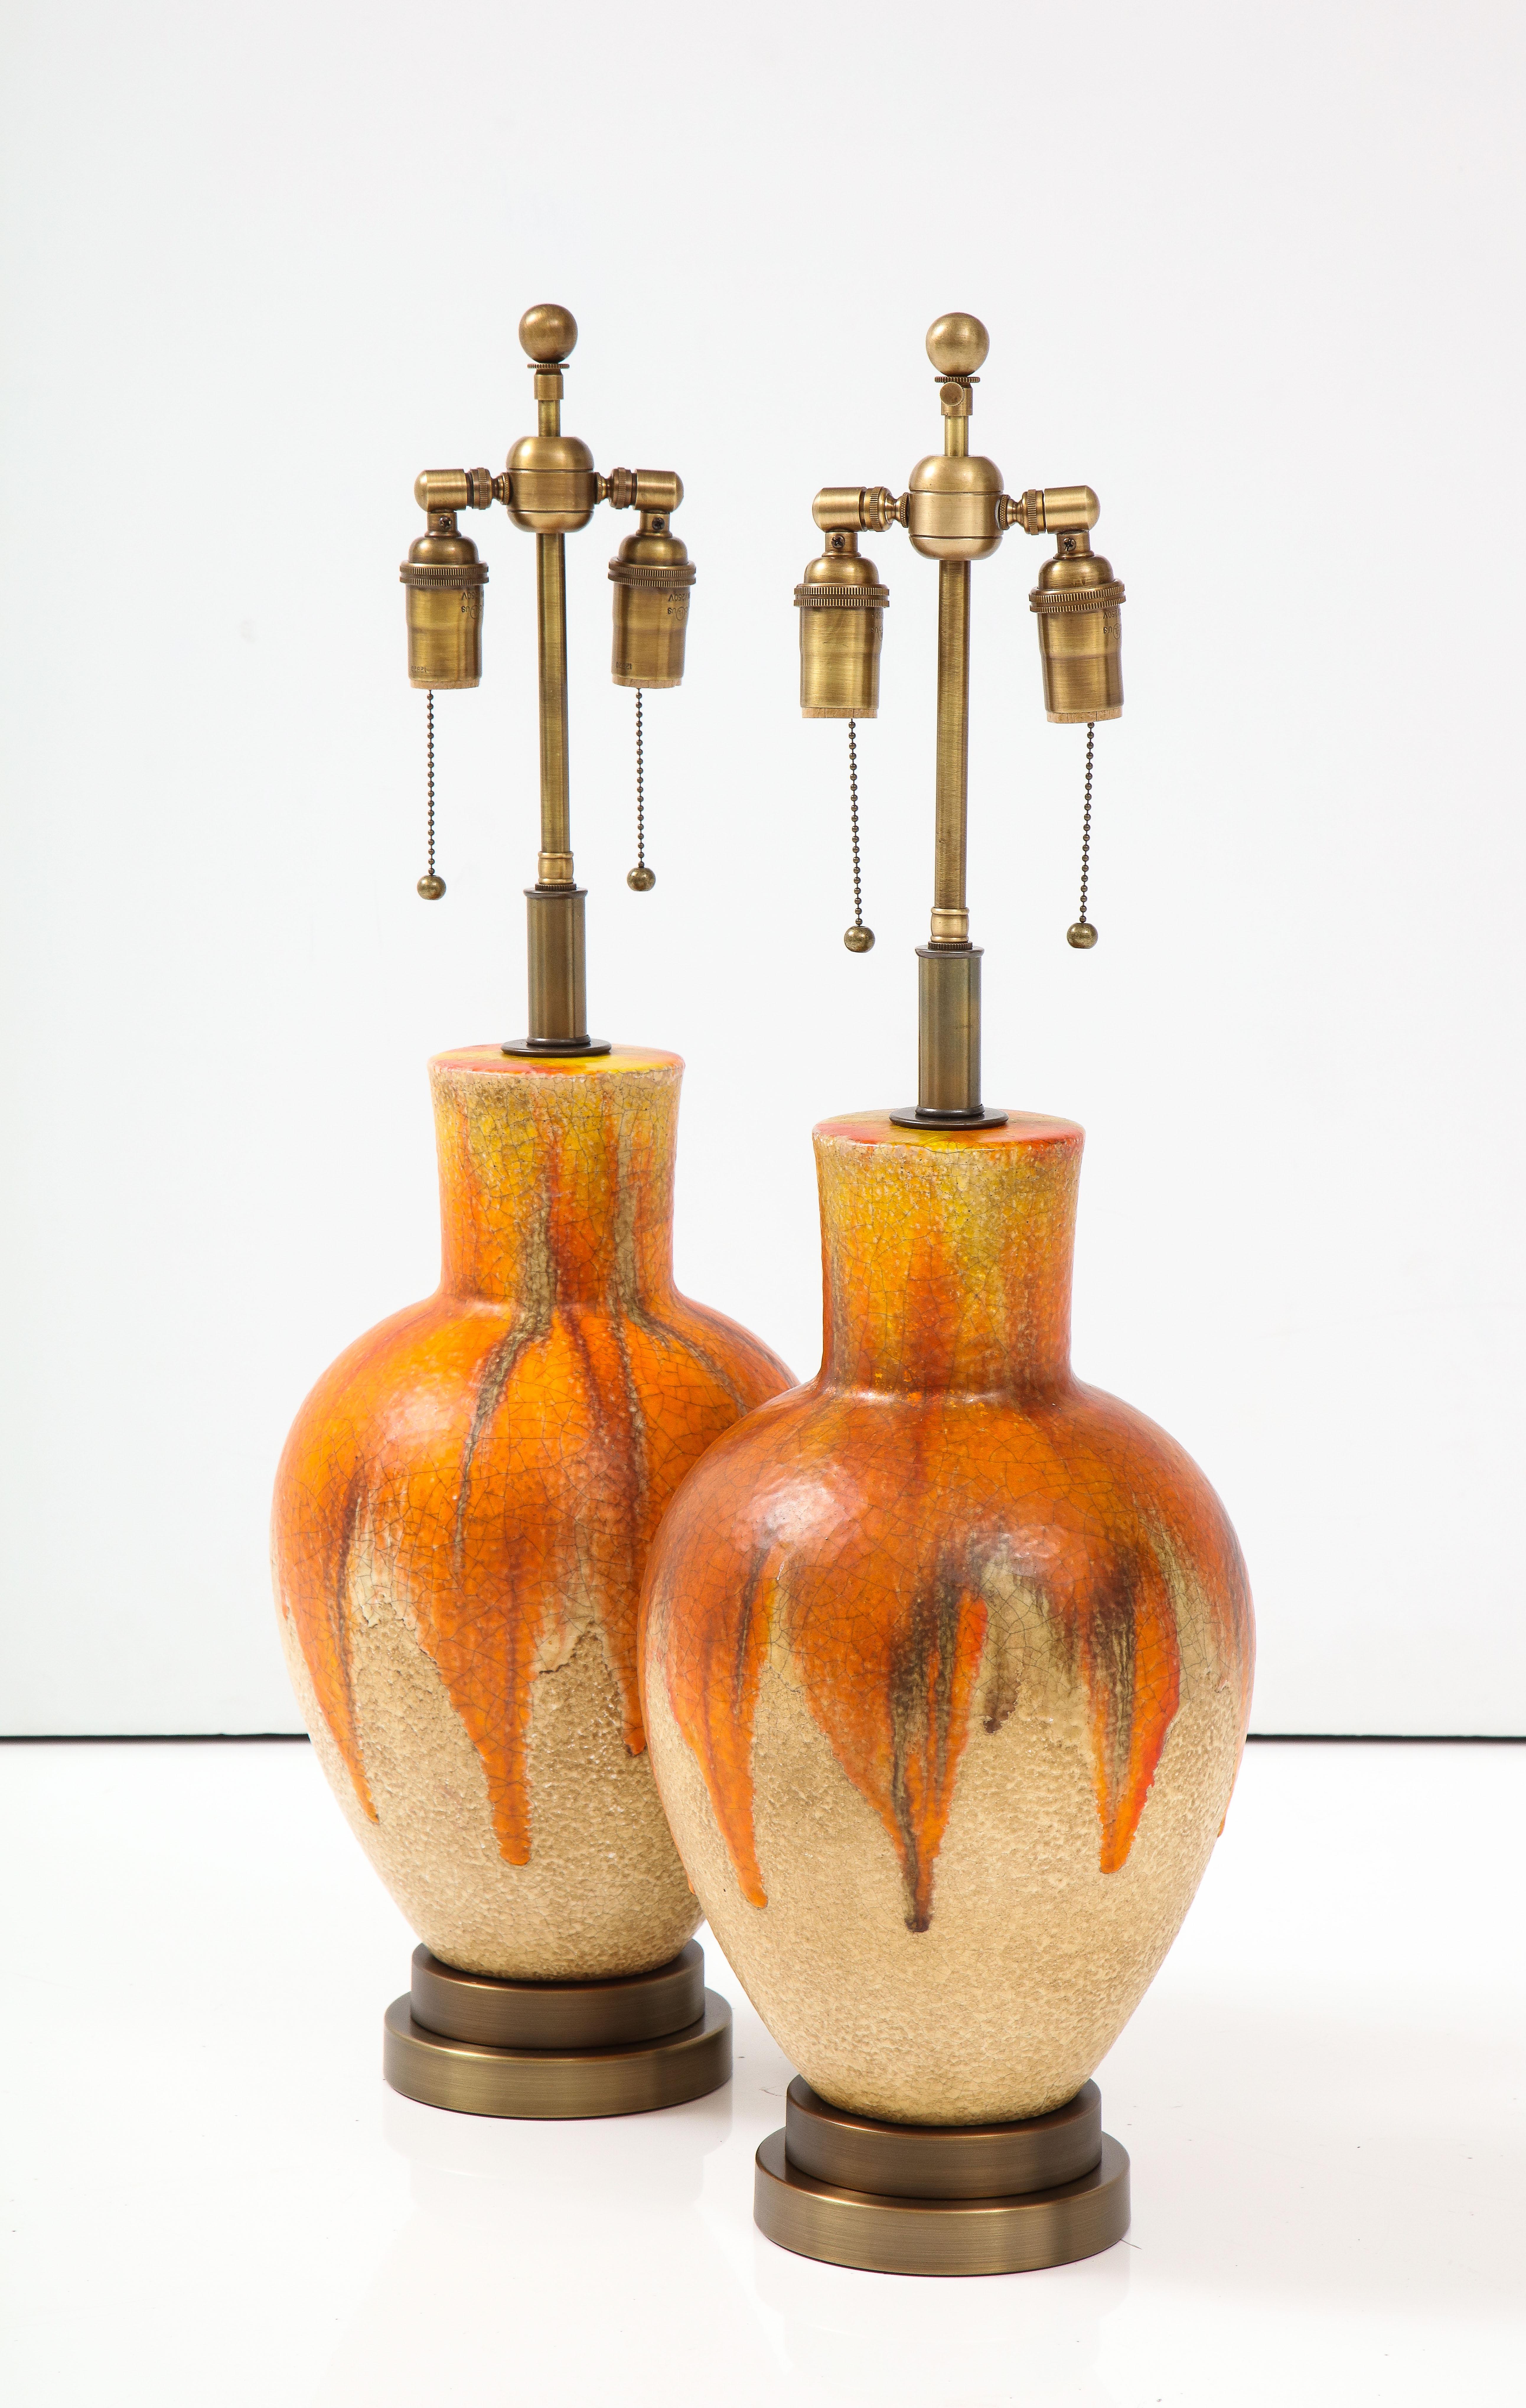 Pair of 1960's drip glazed ceramic lamps.
The ceramic lamps have a lovely textured glazed finish and are mounted on
Bronzed colored bases.
The lamps have been Newly rewired with adjustable Antiqued Bronze double clusters and Rayon cords.
The height